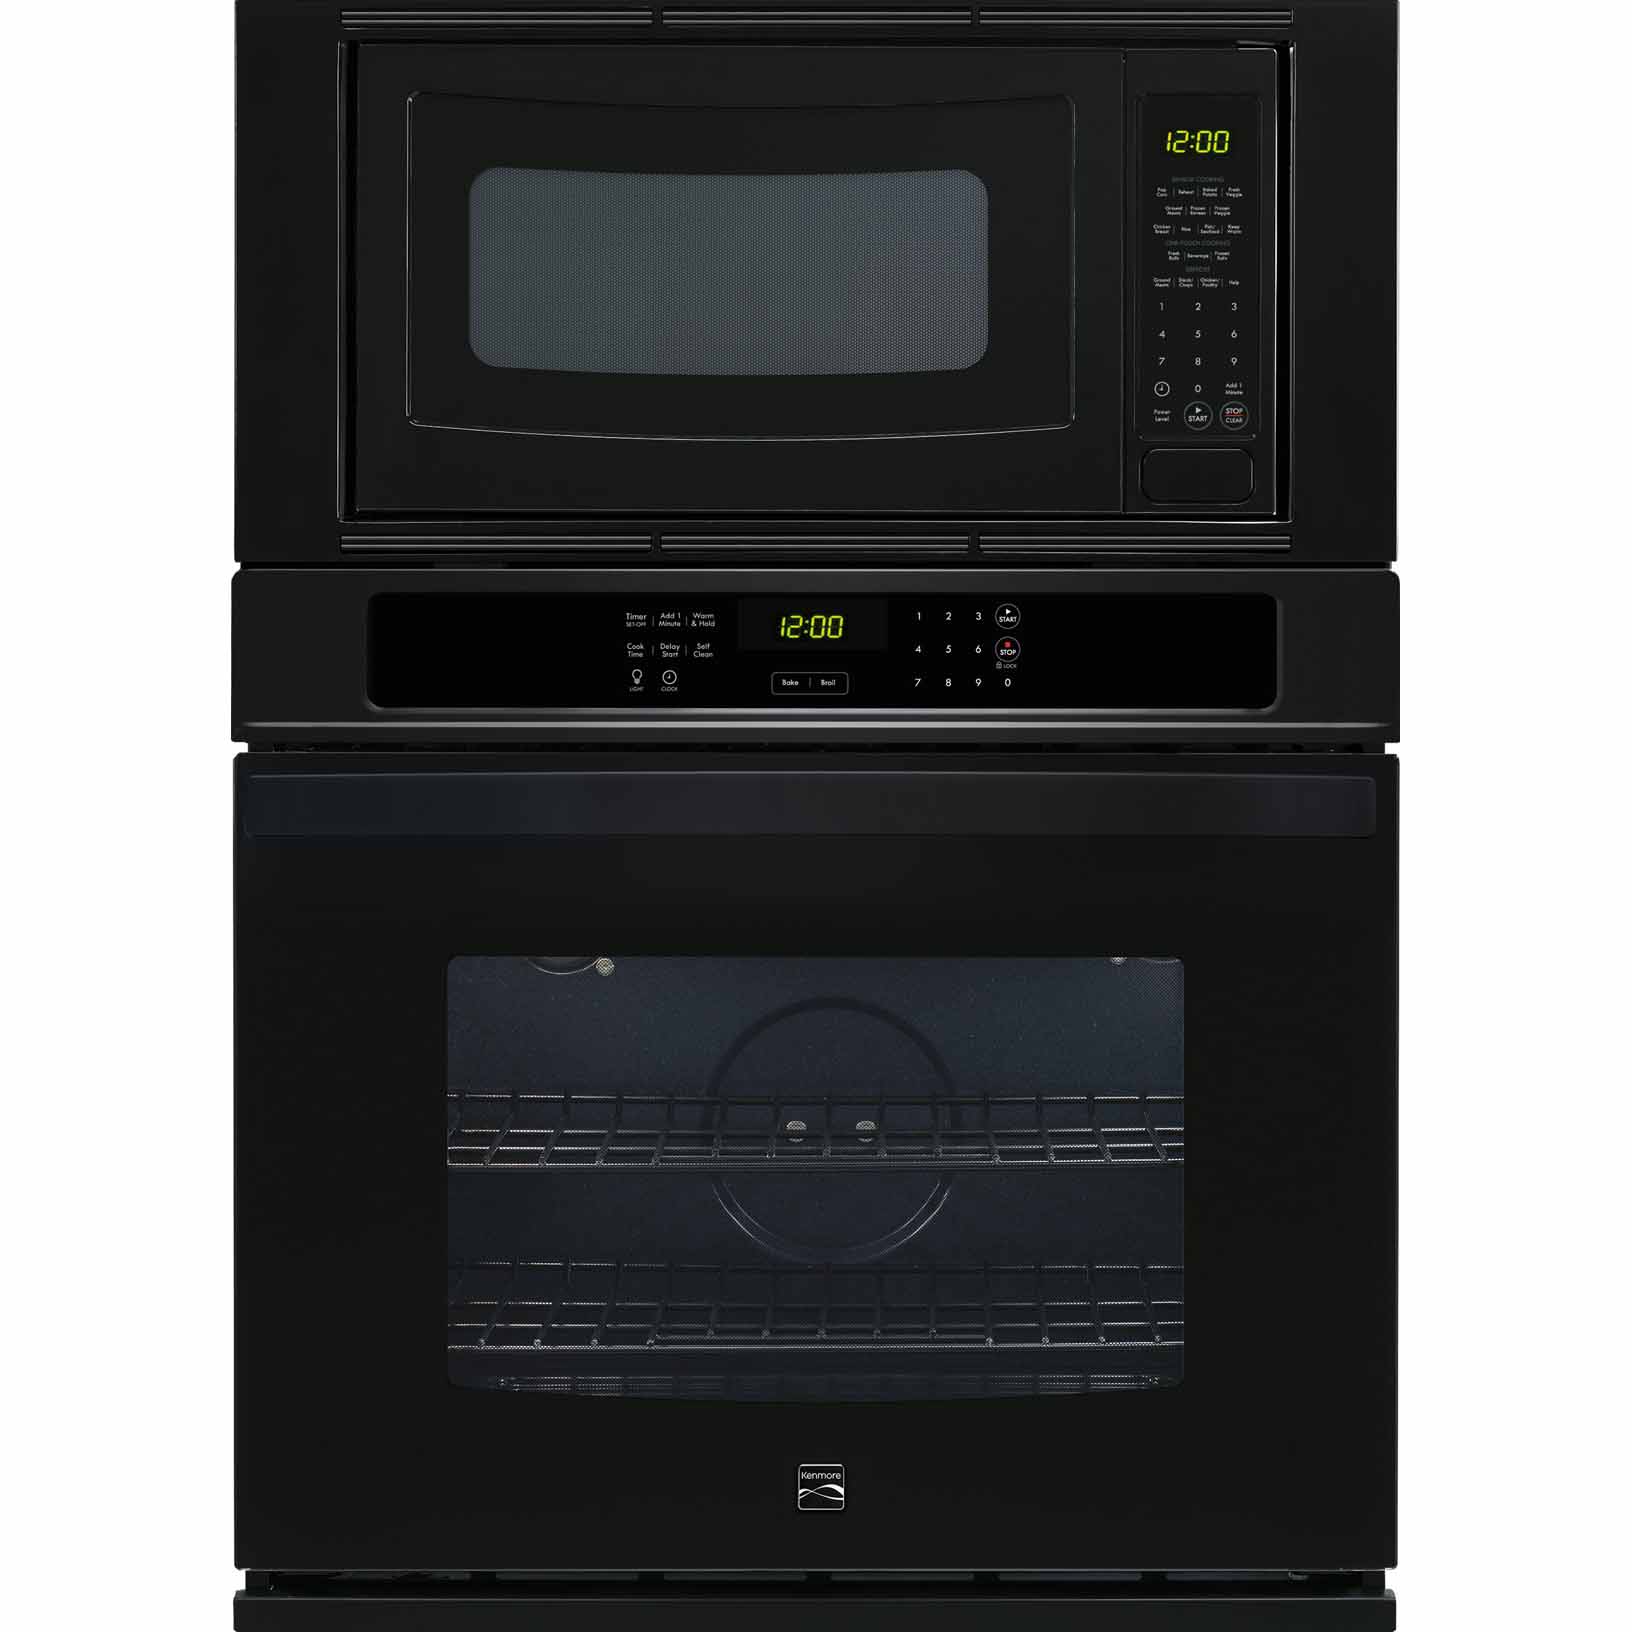 0012505801211 - 49609 27 ELECTRIC COMBINATION WALL OVEN - BLACK